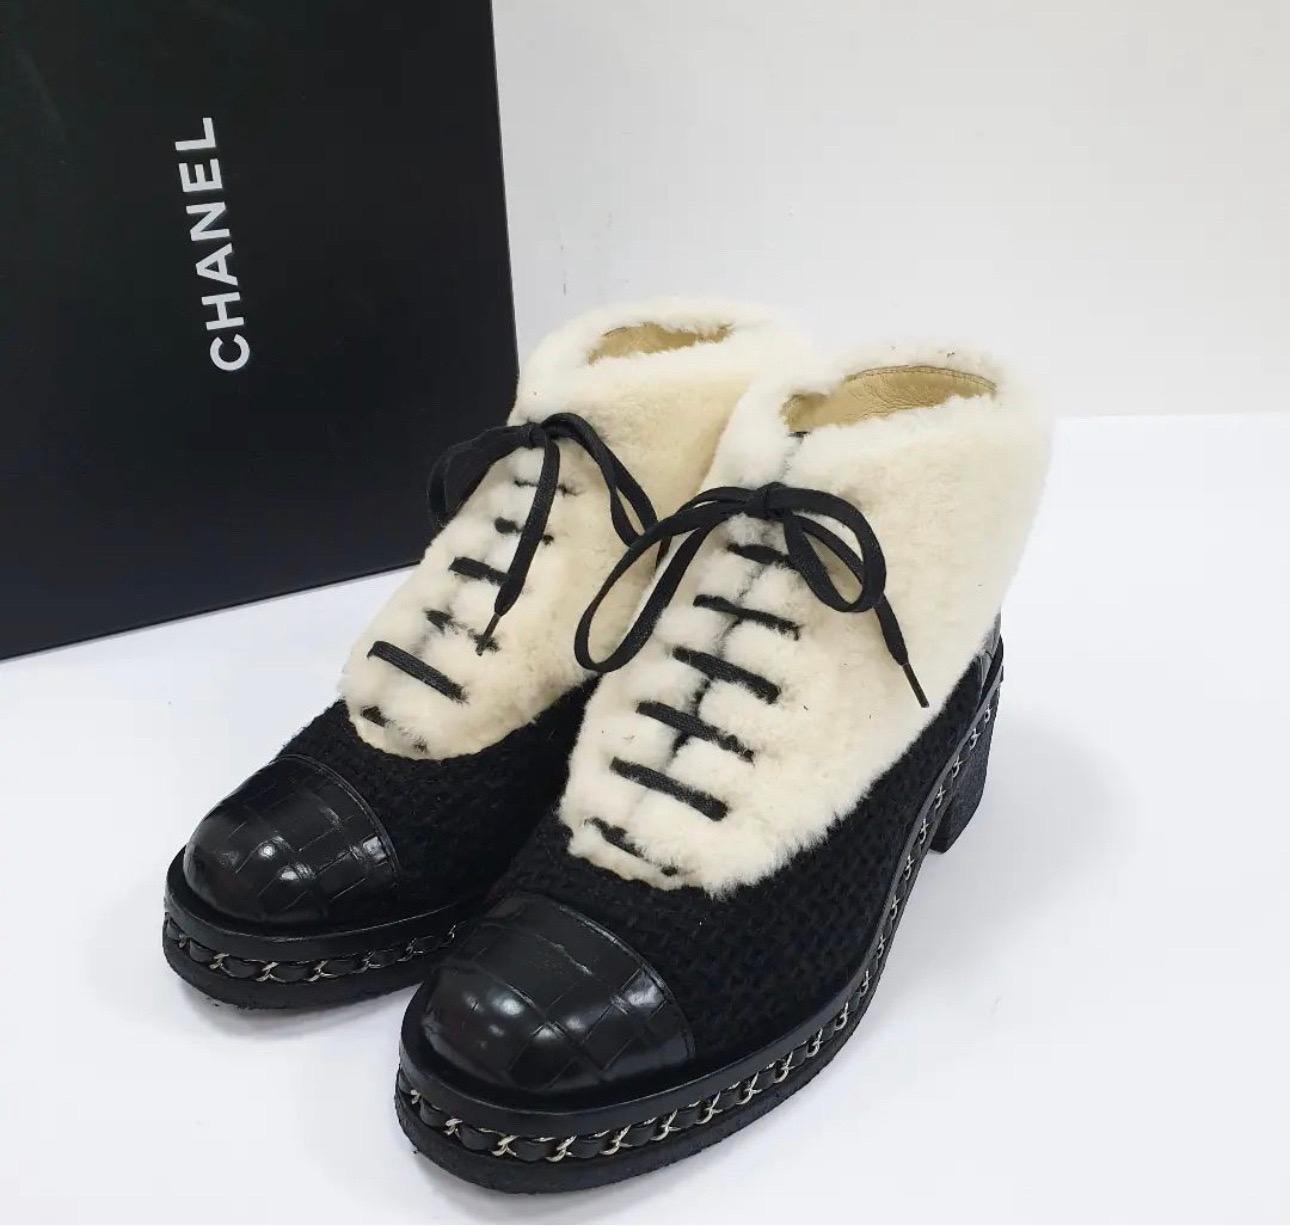 Chanel White Ankle Boots - 10 For Sale on 1stDibs